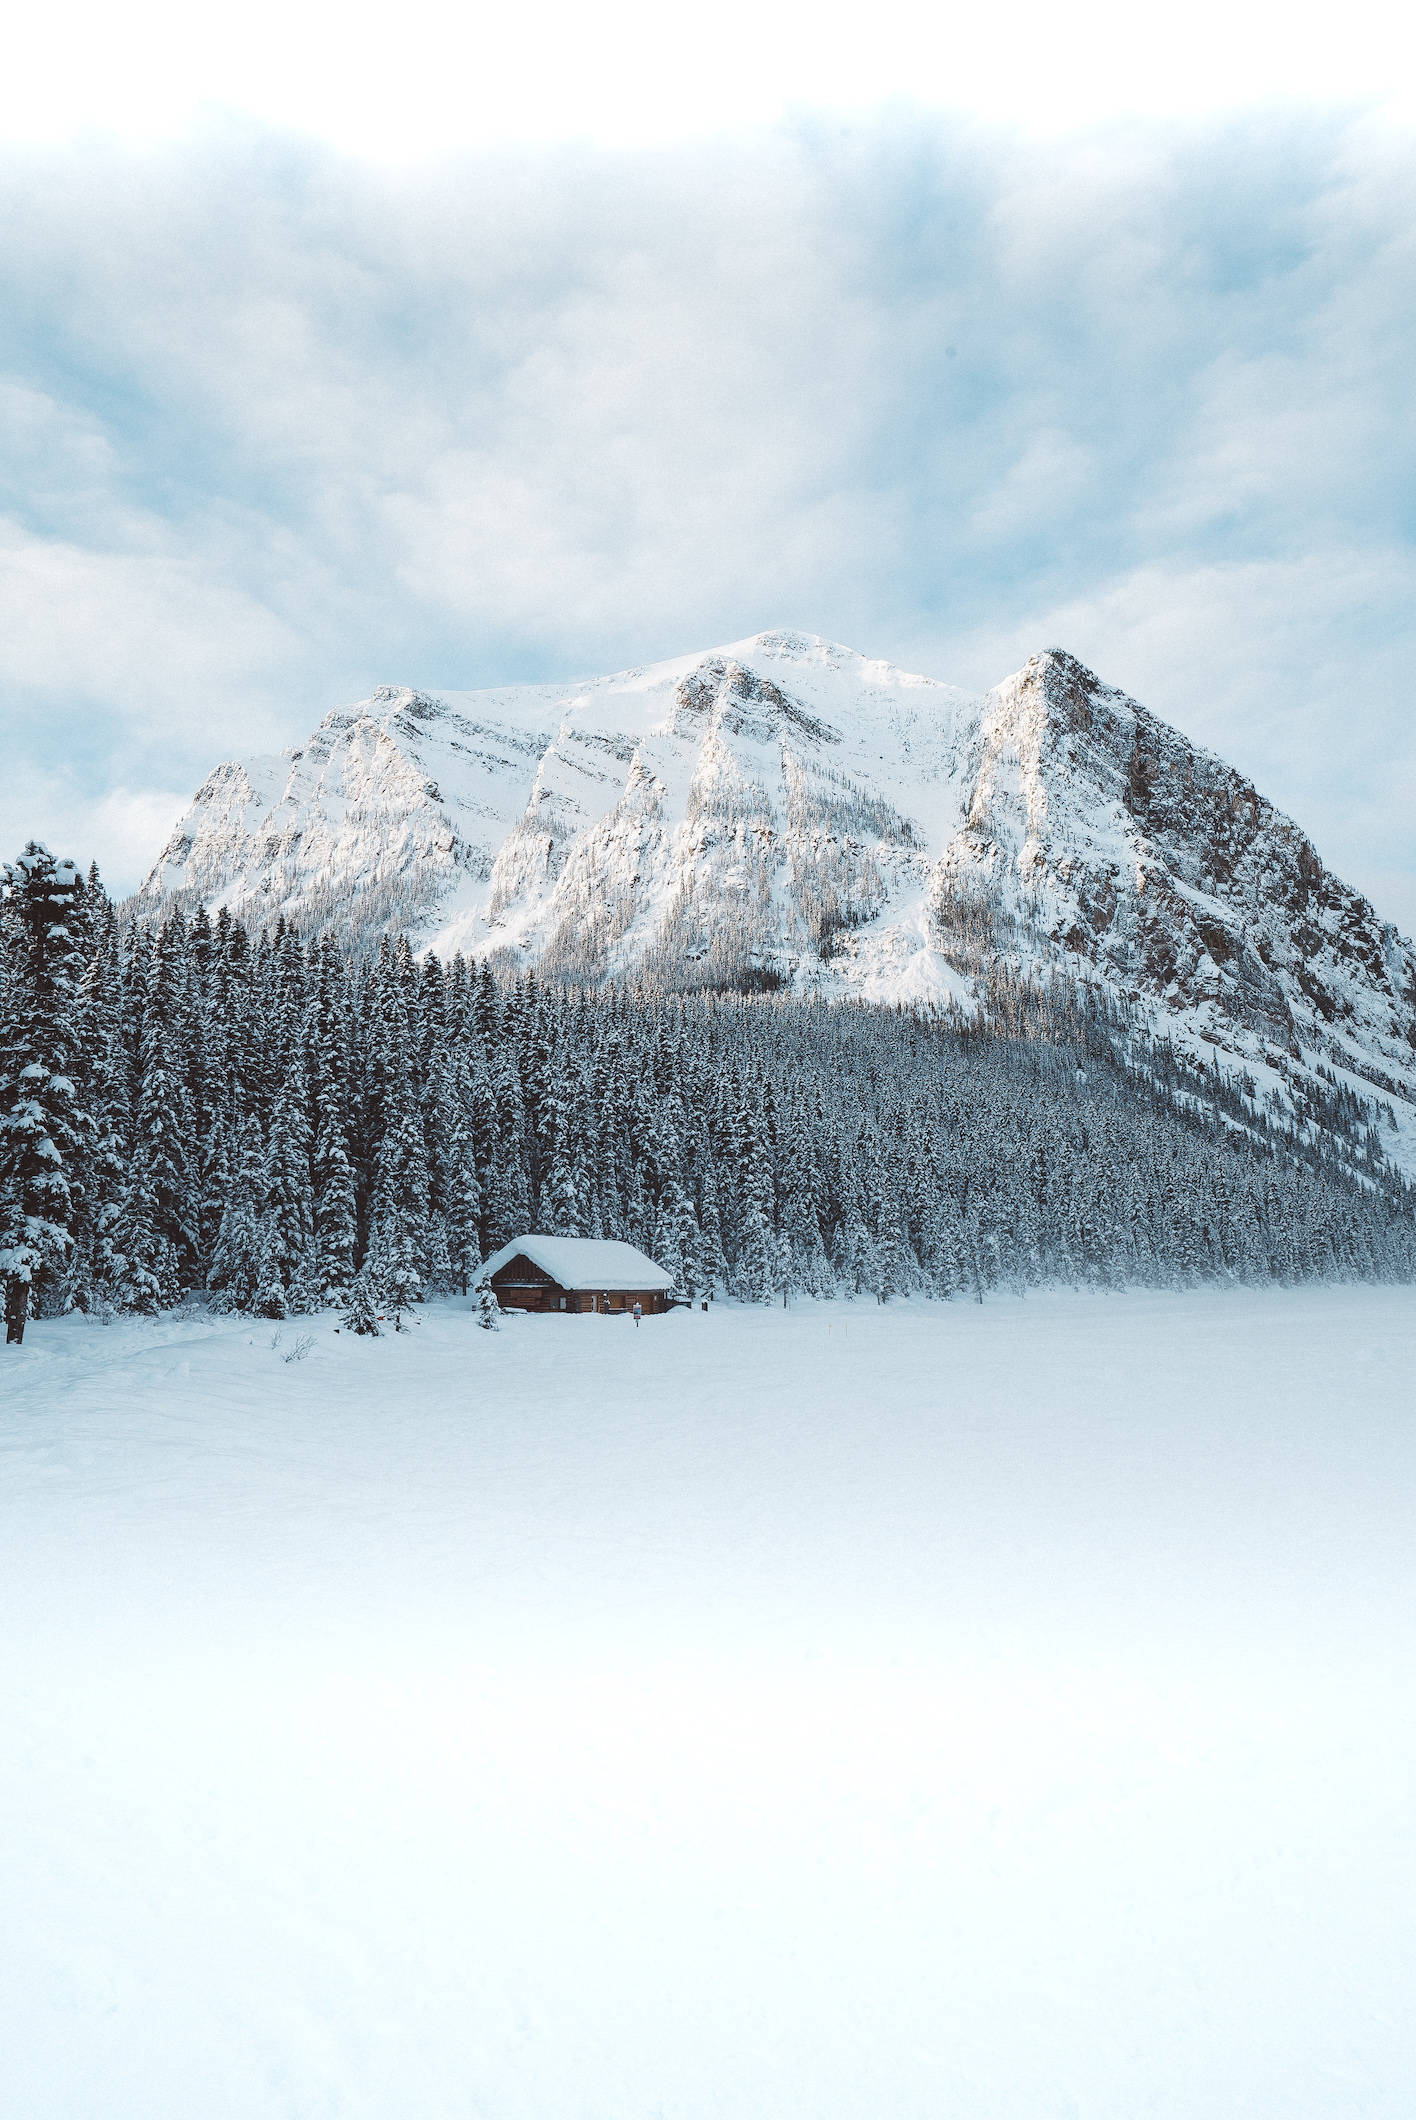 Why You Need to Visit Alberta This Winter